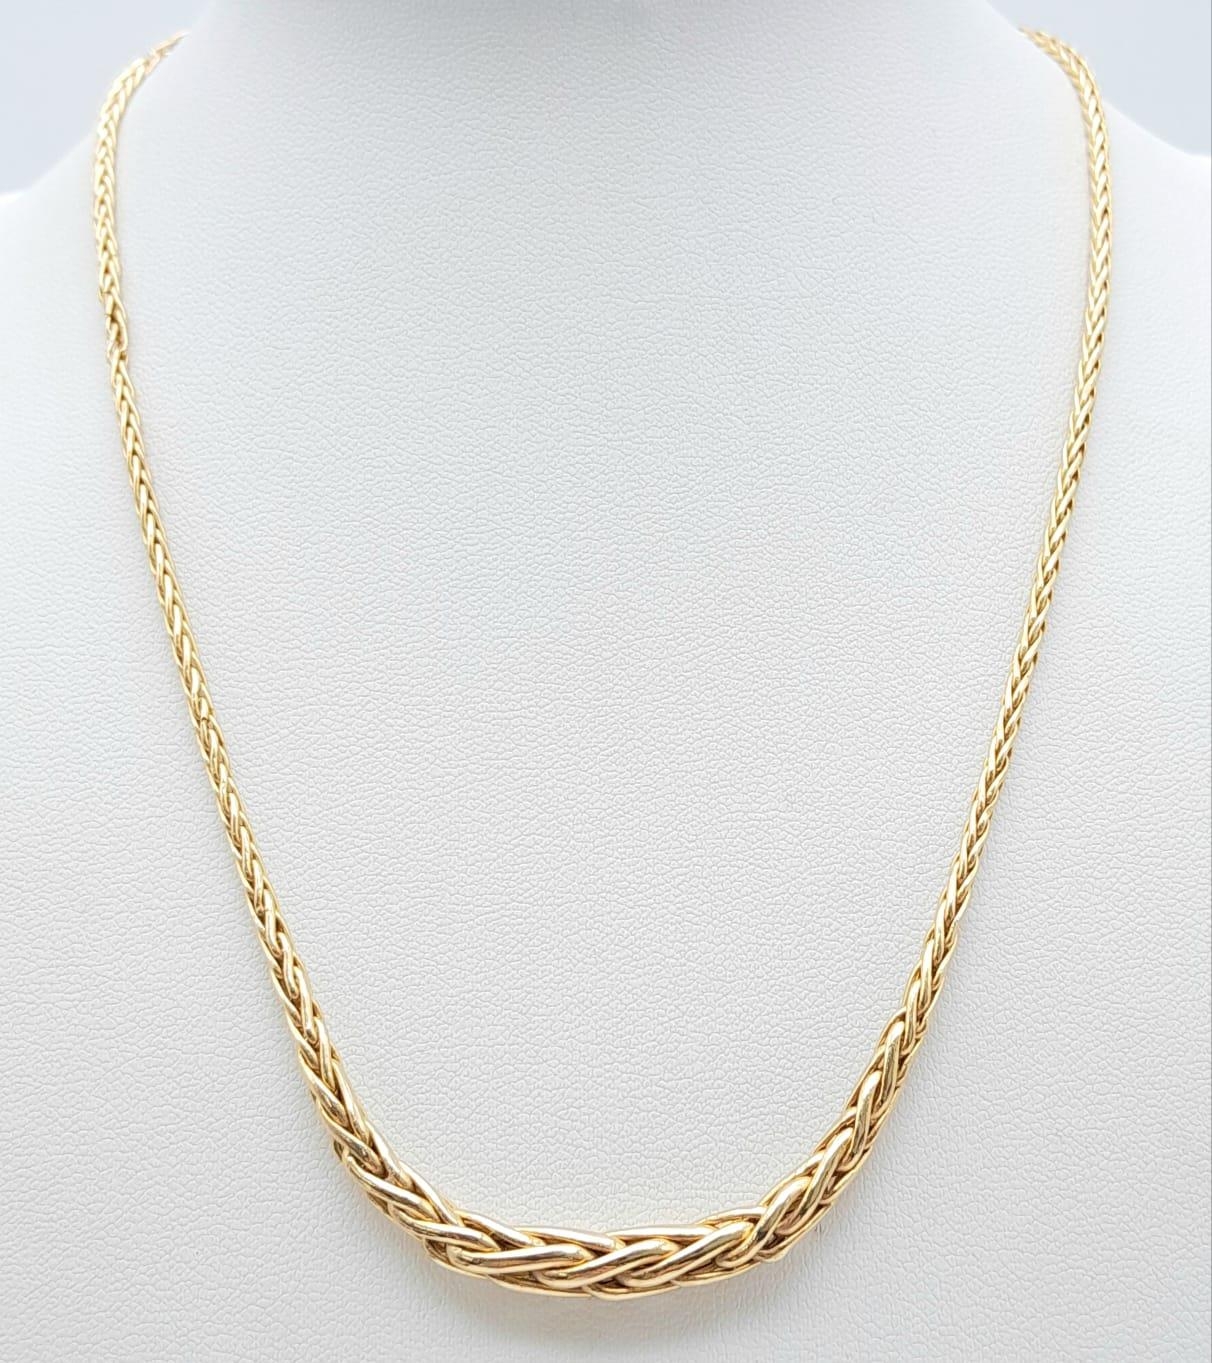 A Vintage 9K Yellow Gold Woven Link Necklace. 42cm length. 5.7g weight.